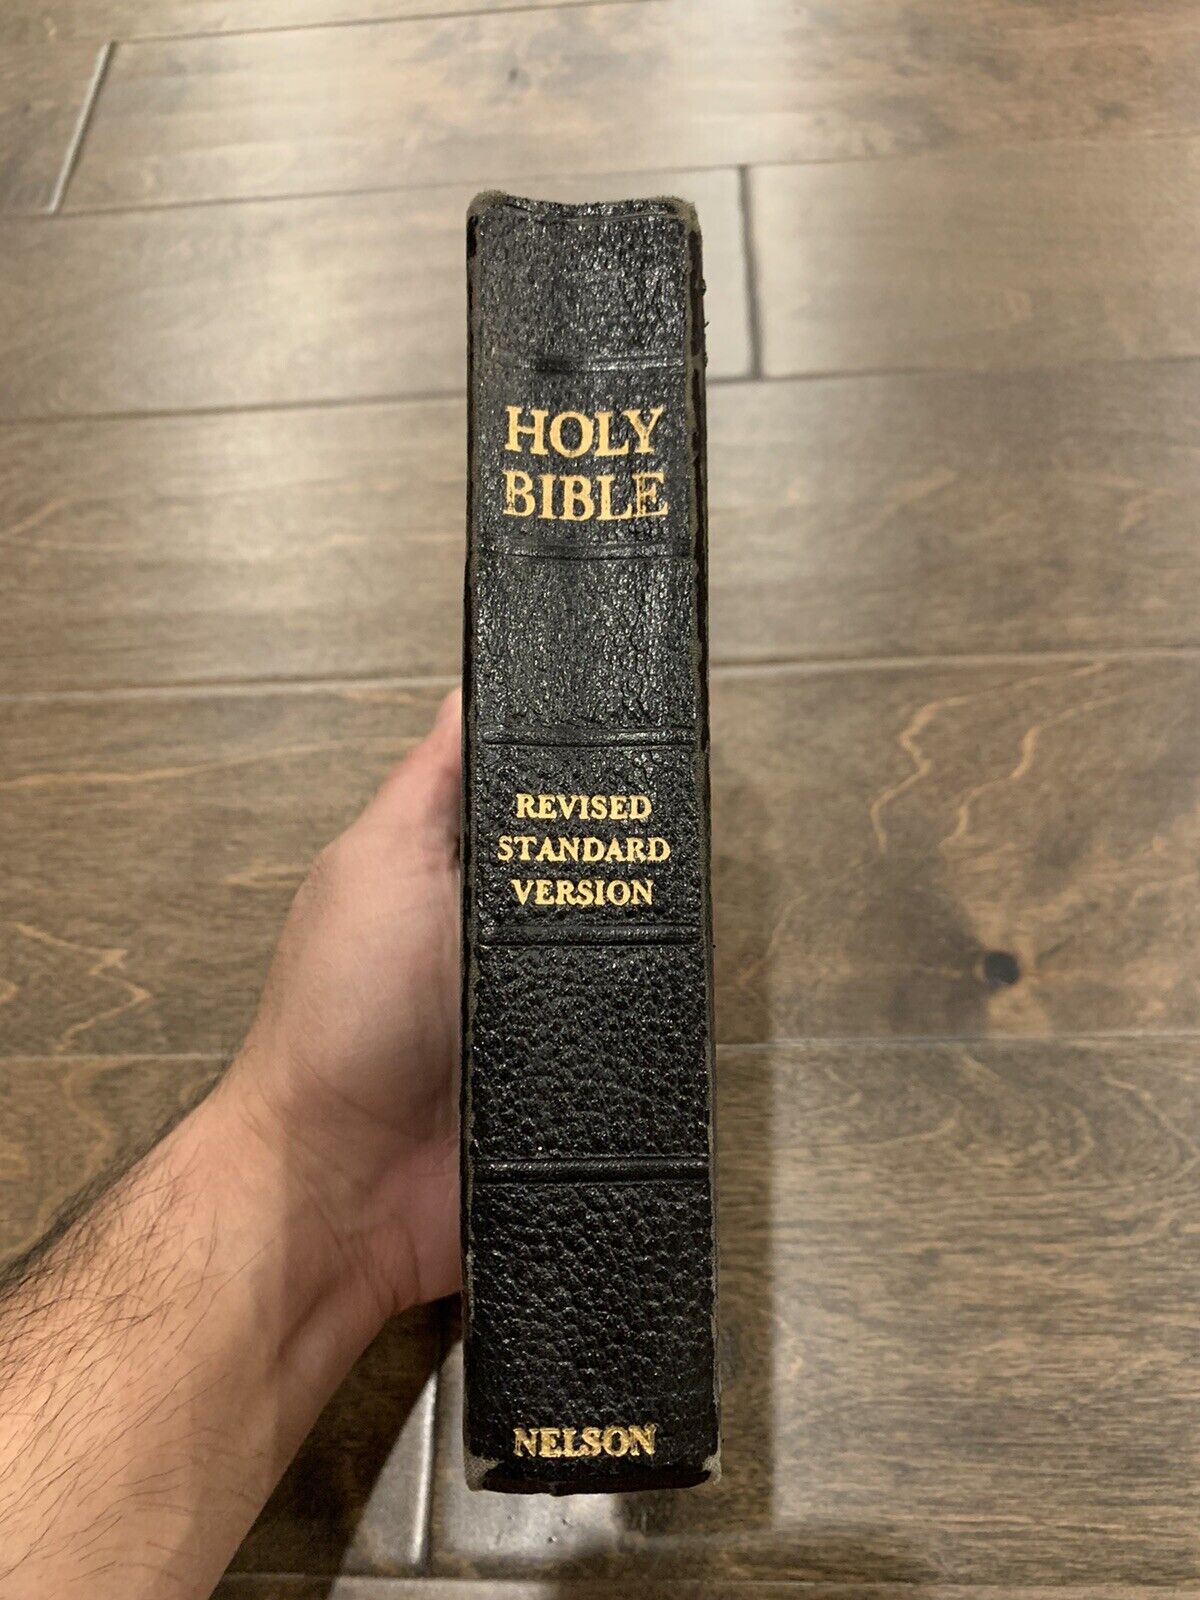 Nelson Holy Bible Revised Standard Version 1946 1952